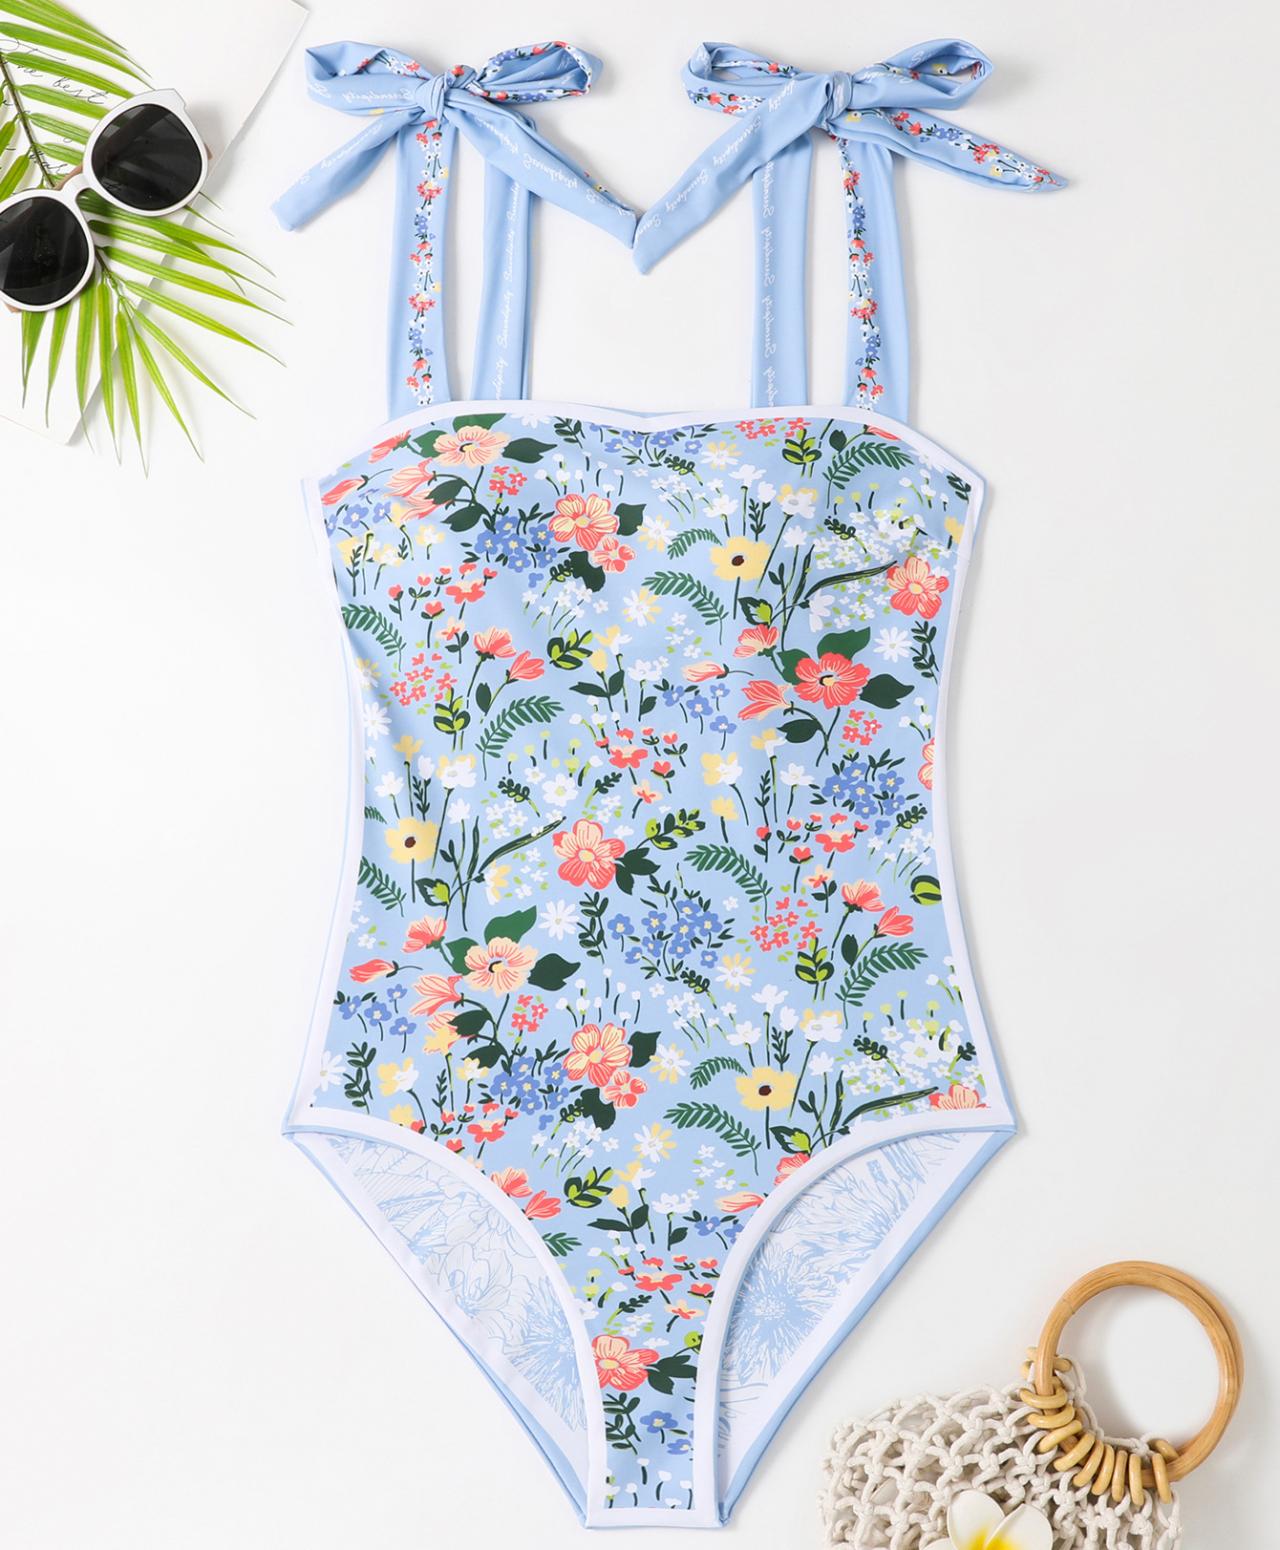 Floral Print Retro One-piece Swimsuits Swimsuit